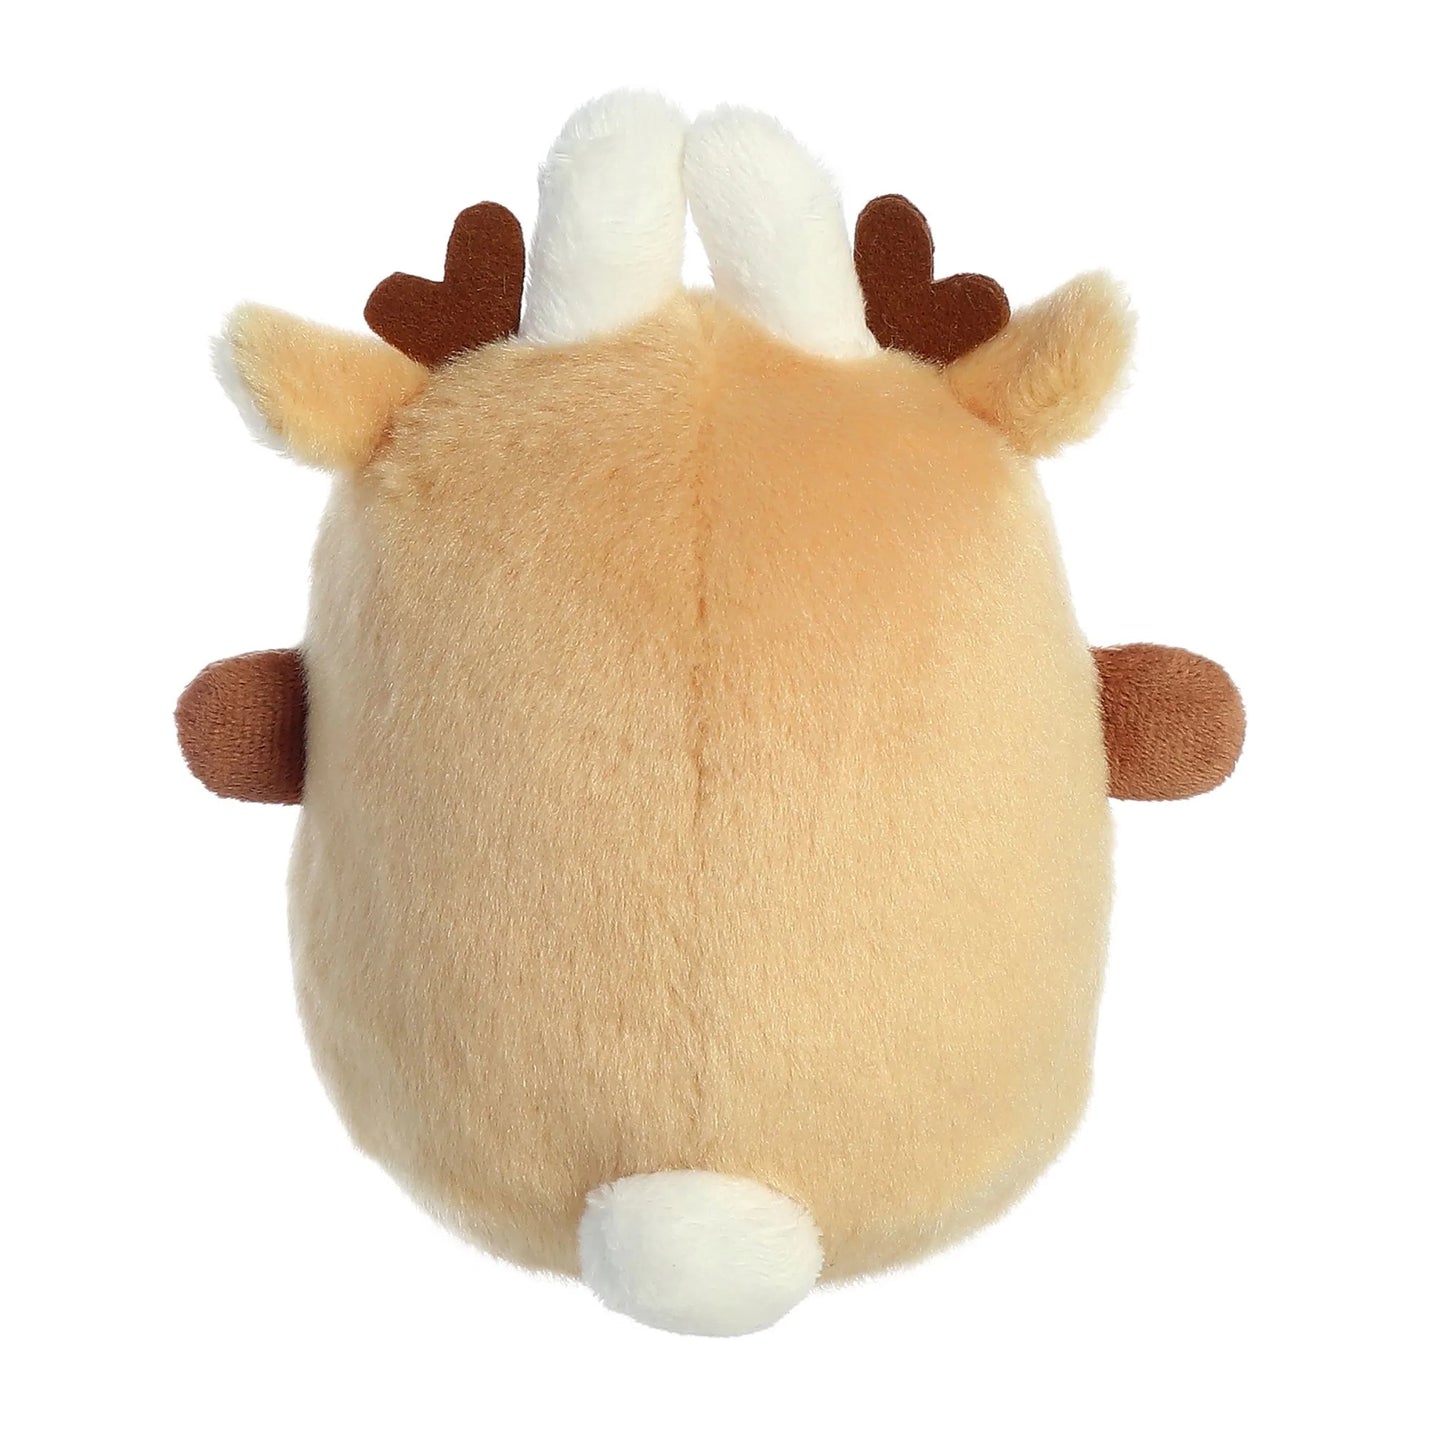 Molang is ready for some winter fun with their adorable reindeer costume! This Reindeer Molang has iconic Molang bunny in a cozy brown reindeer outfit